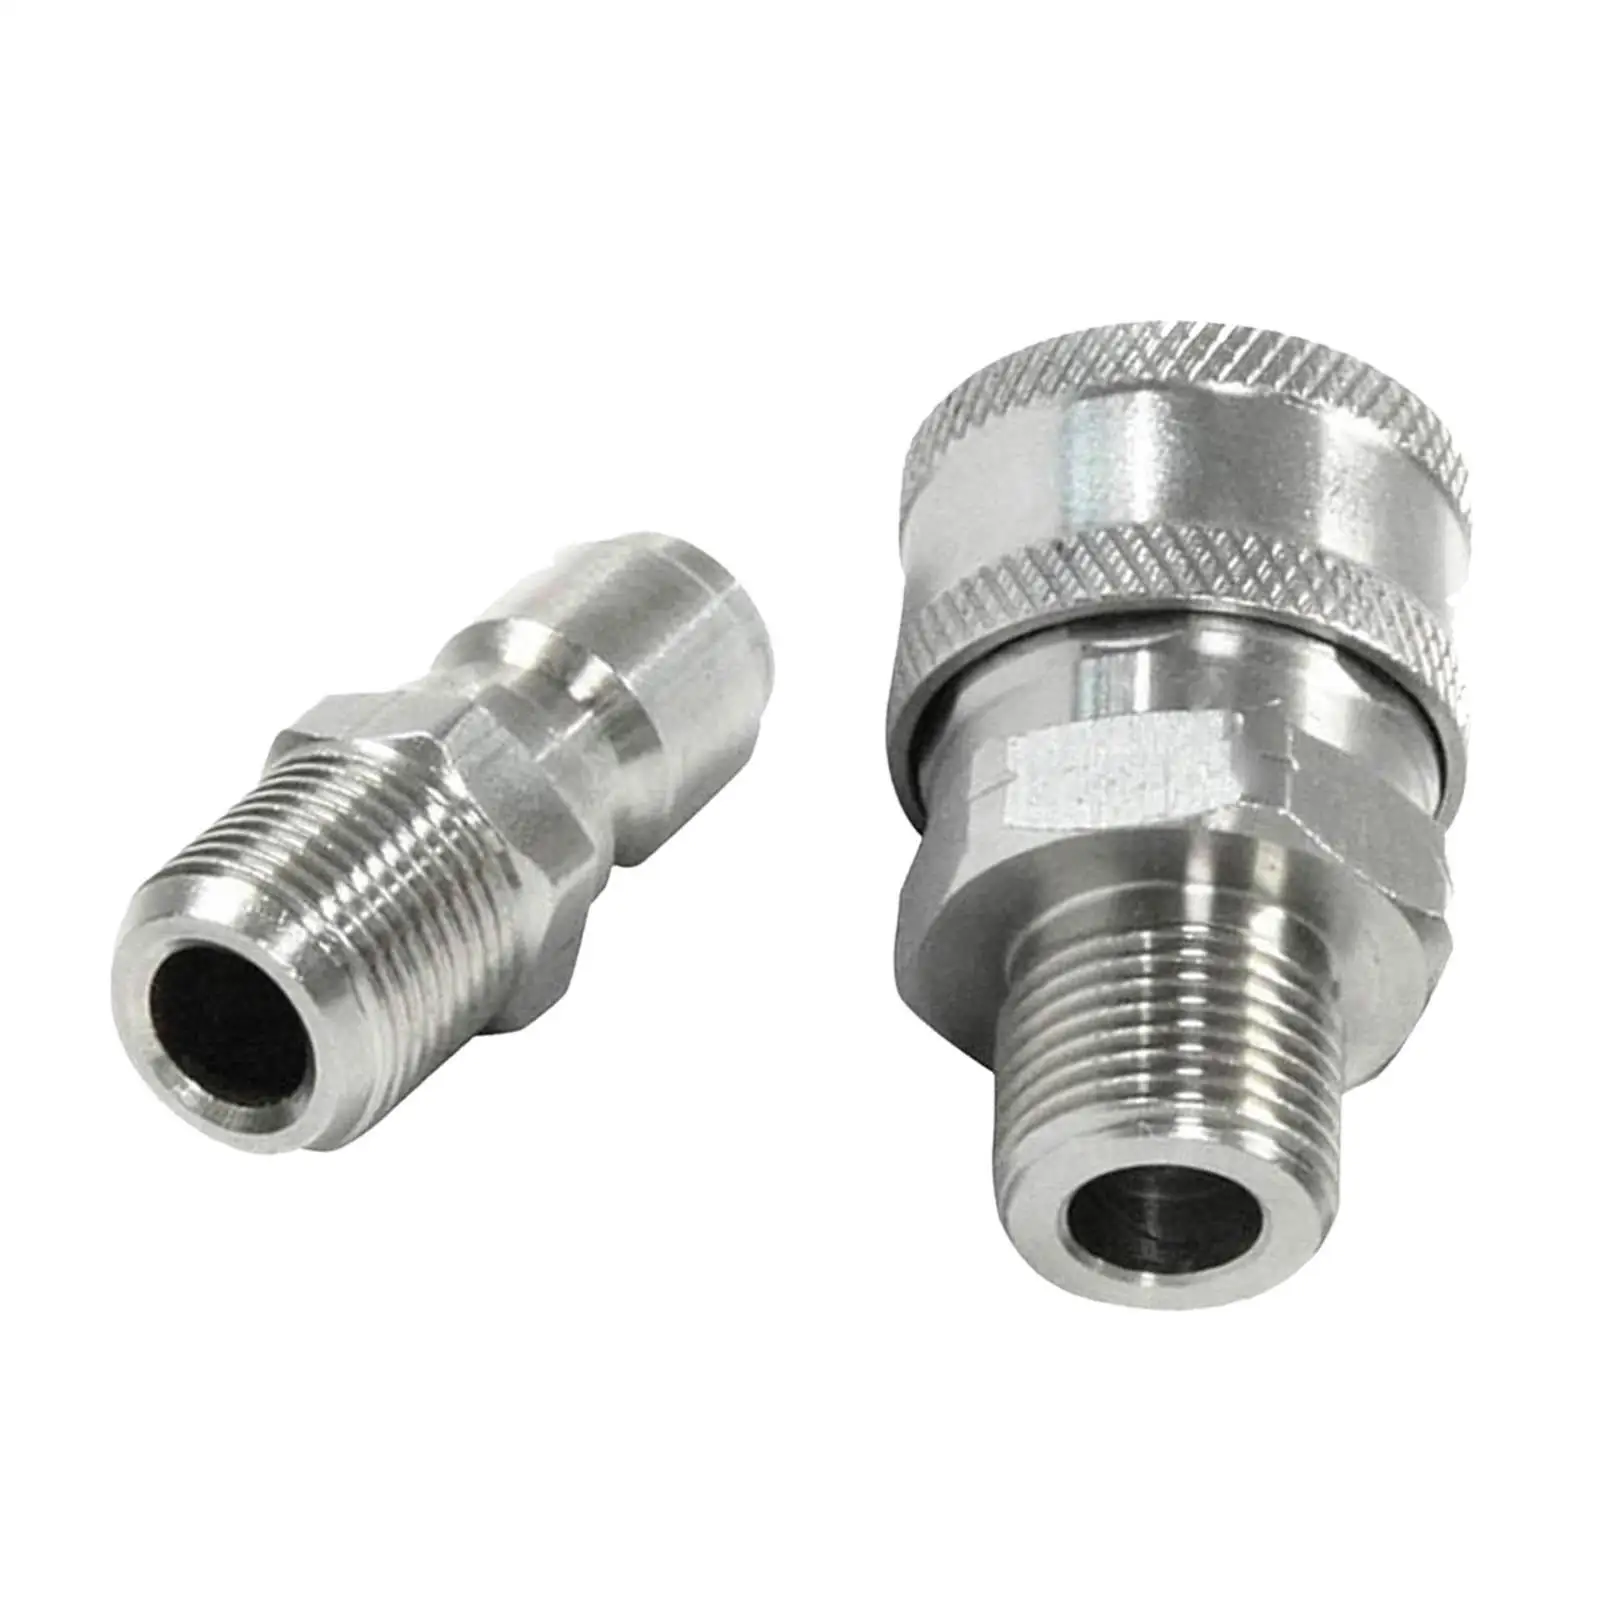 2Pcs Pressure Washer Adapter Set 3/8 inch Quick Connect Kit Water Pump Surface Cleaner Quick Release Connector Not Easy to Leak